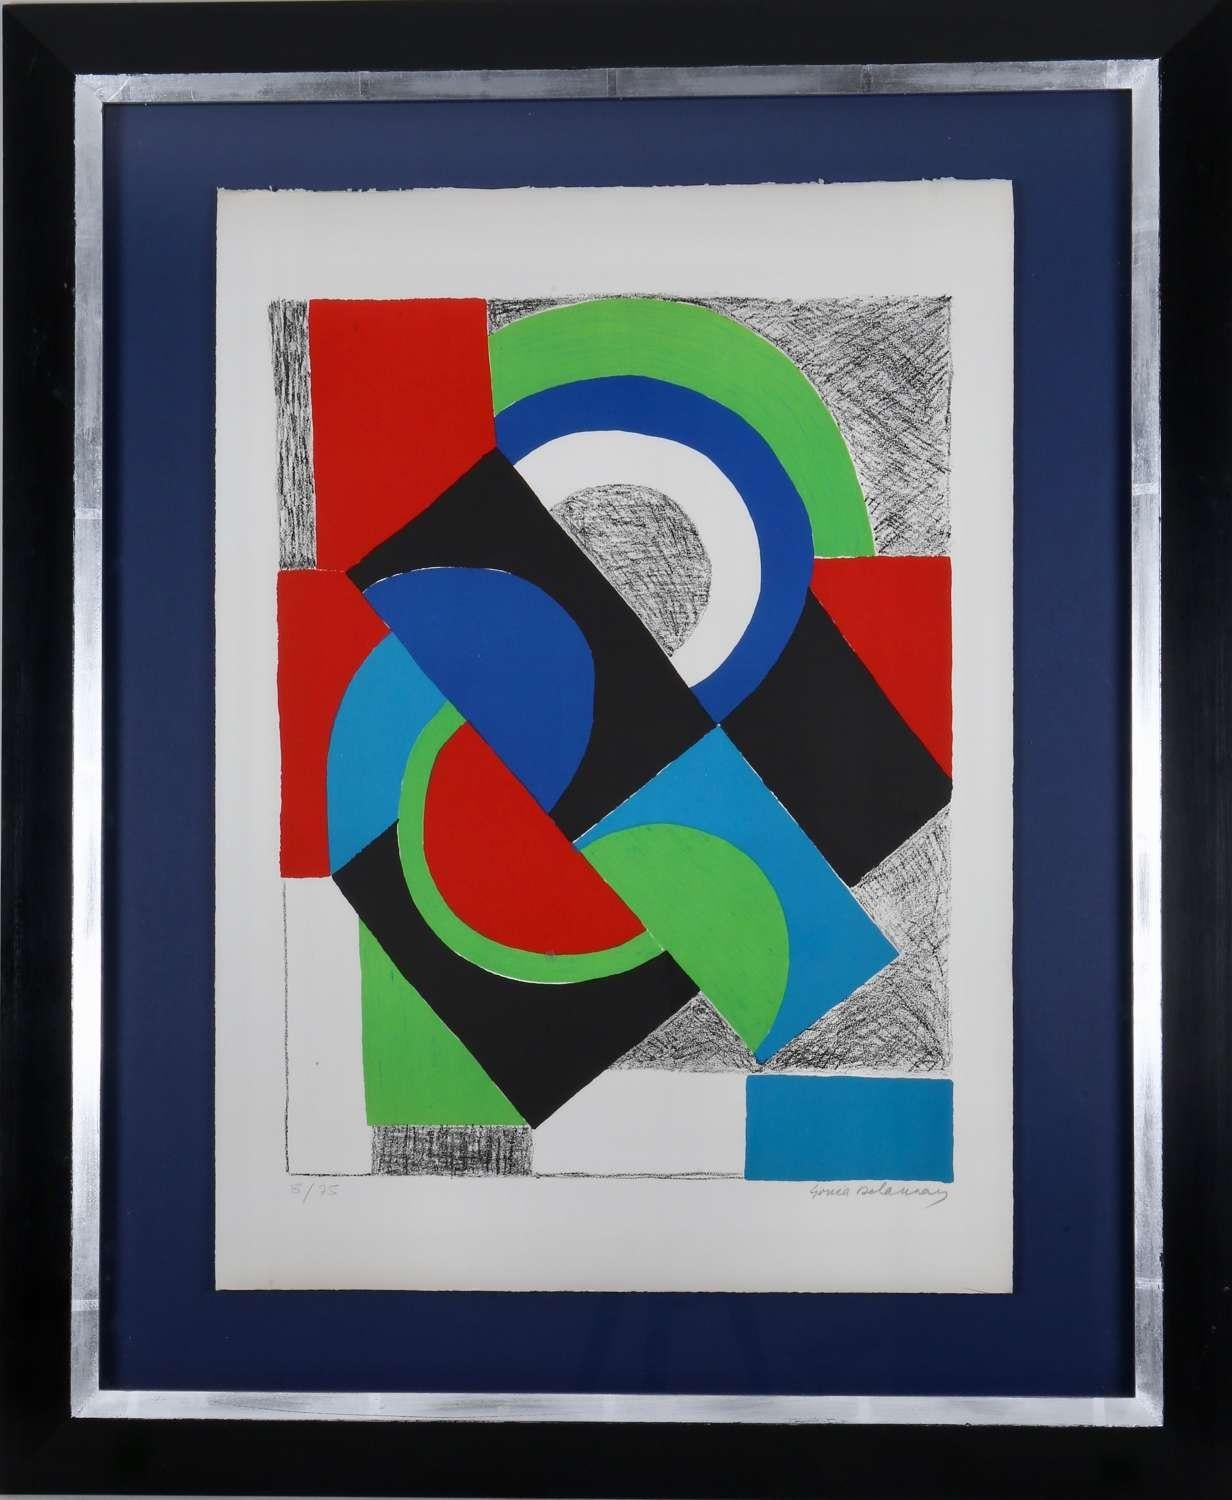 Sonia Delaunay: "Contrepoint", Framed, 1965 

Artist:  Sonia Delaunay (1885-1979)
Medium:  Original Colour Lithograph
Image size:  600 x 457 mm (23 5/8 x 18 inches)
Sheet size:  762 x 545 mm (30 x 21 inches)
Framed size:  1030 x 850 mm (40 1/2 x 33